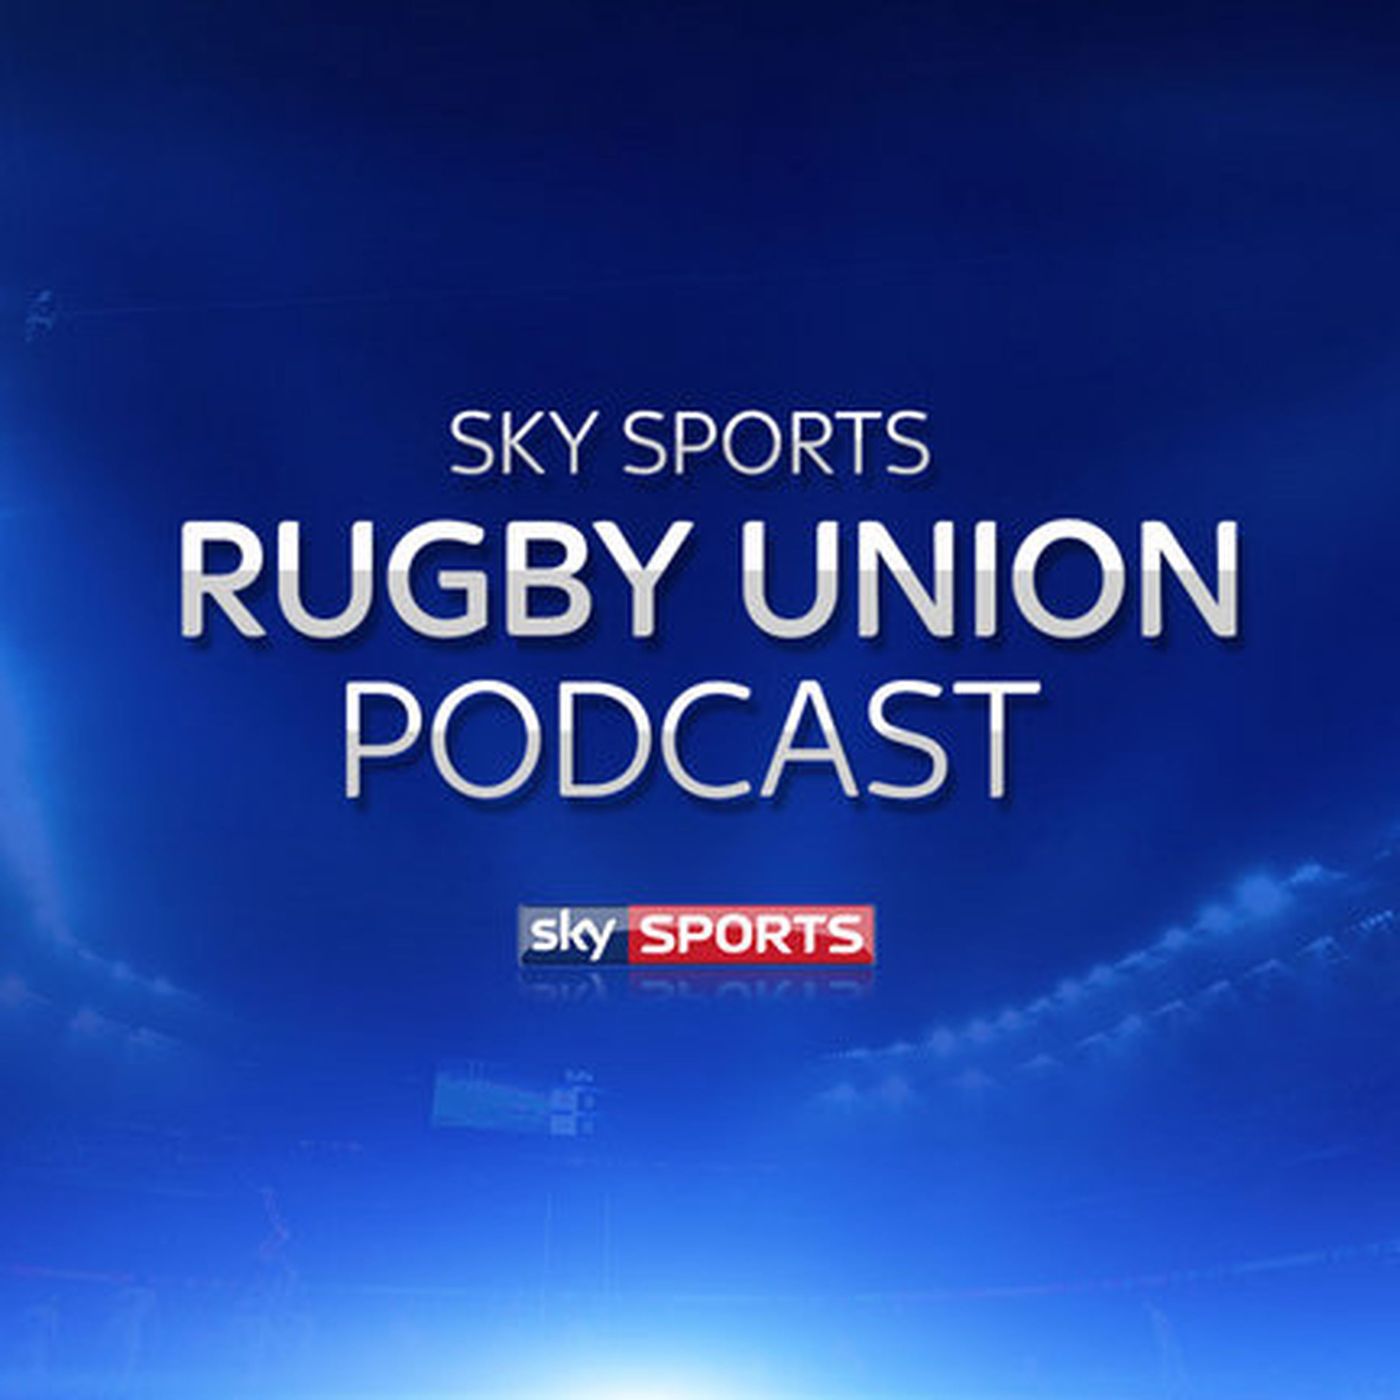 Sky Sports Rugby Union Podcast - 13th April